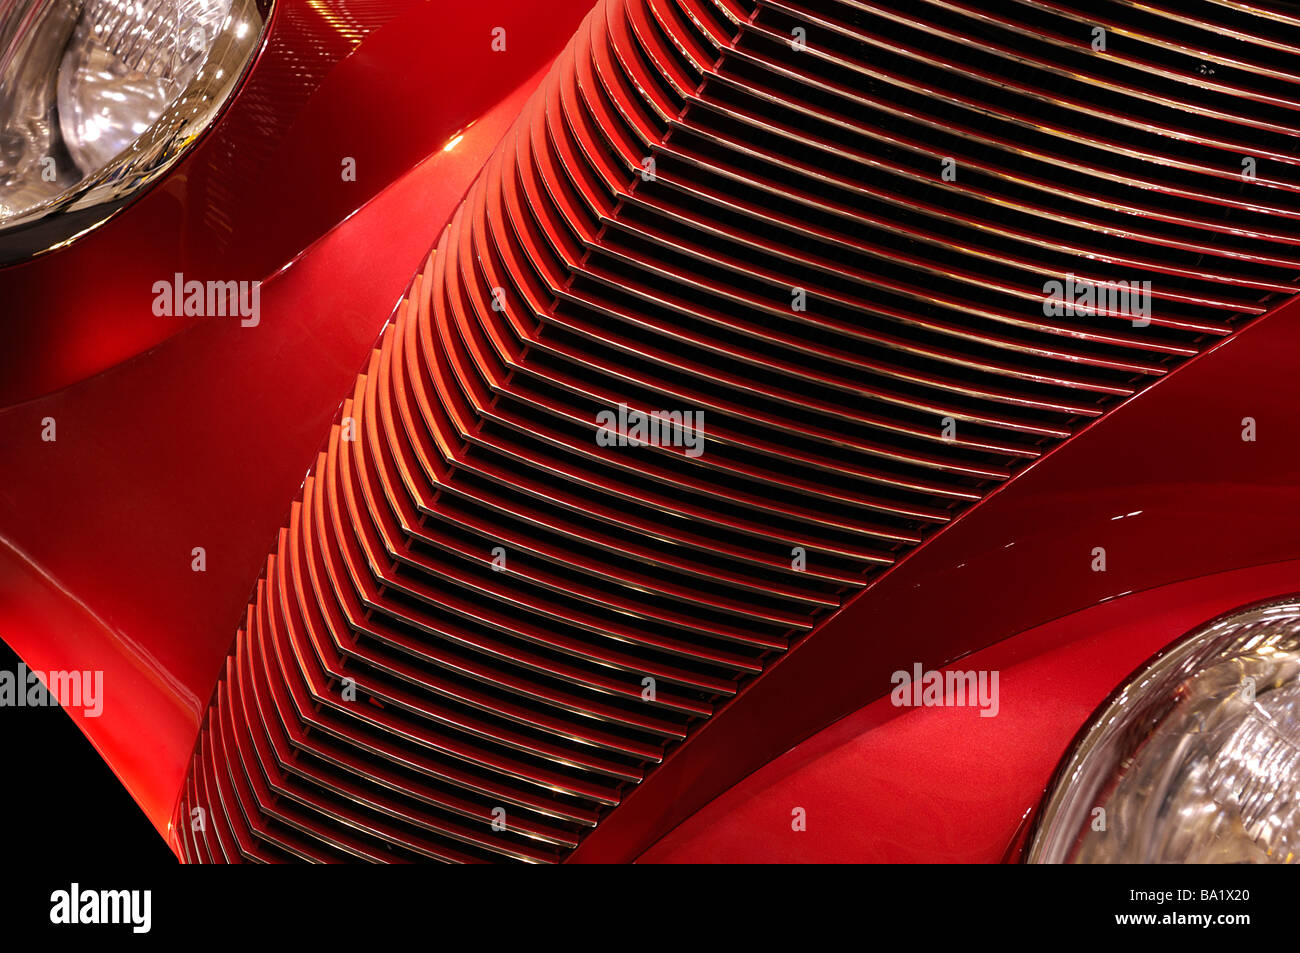 Red classic car details Stock Photo